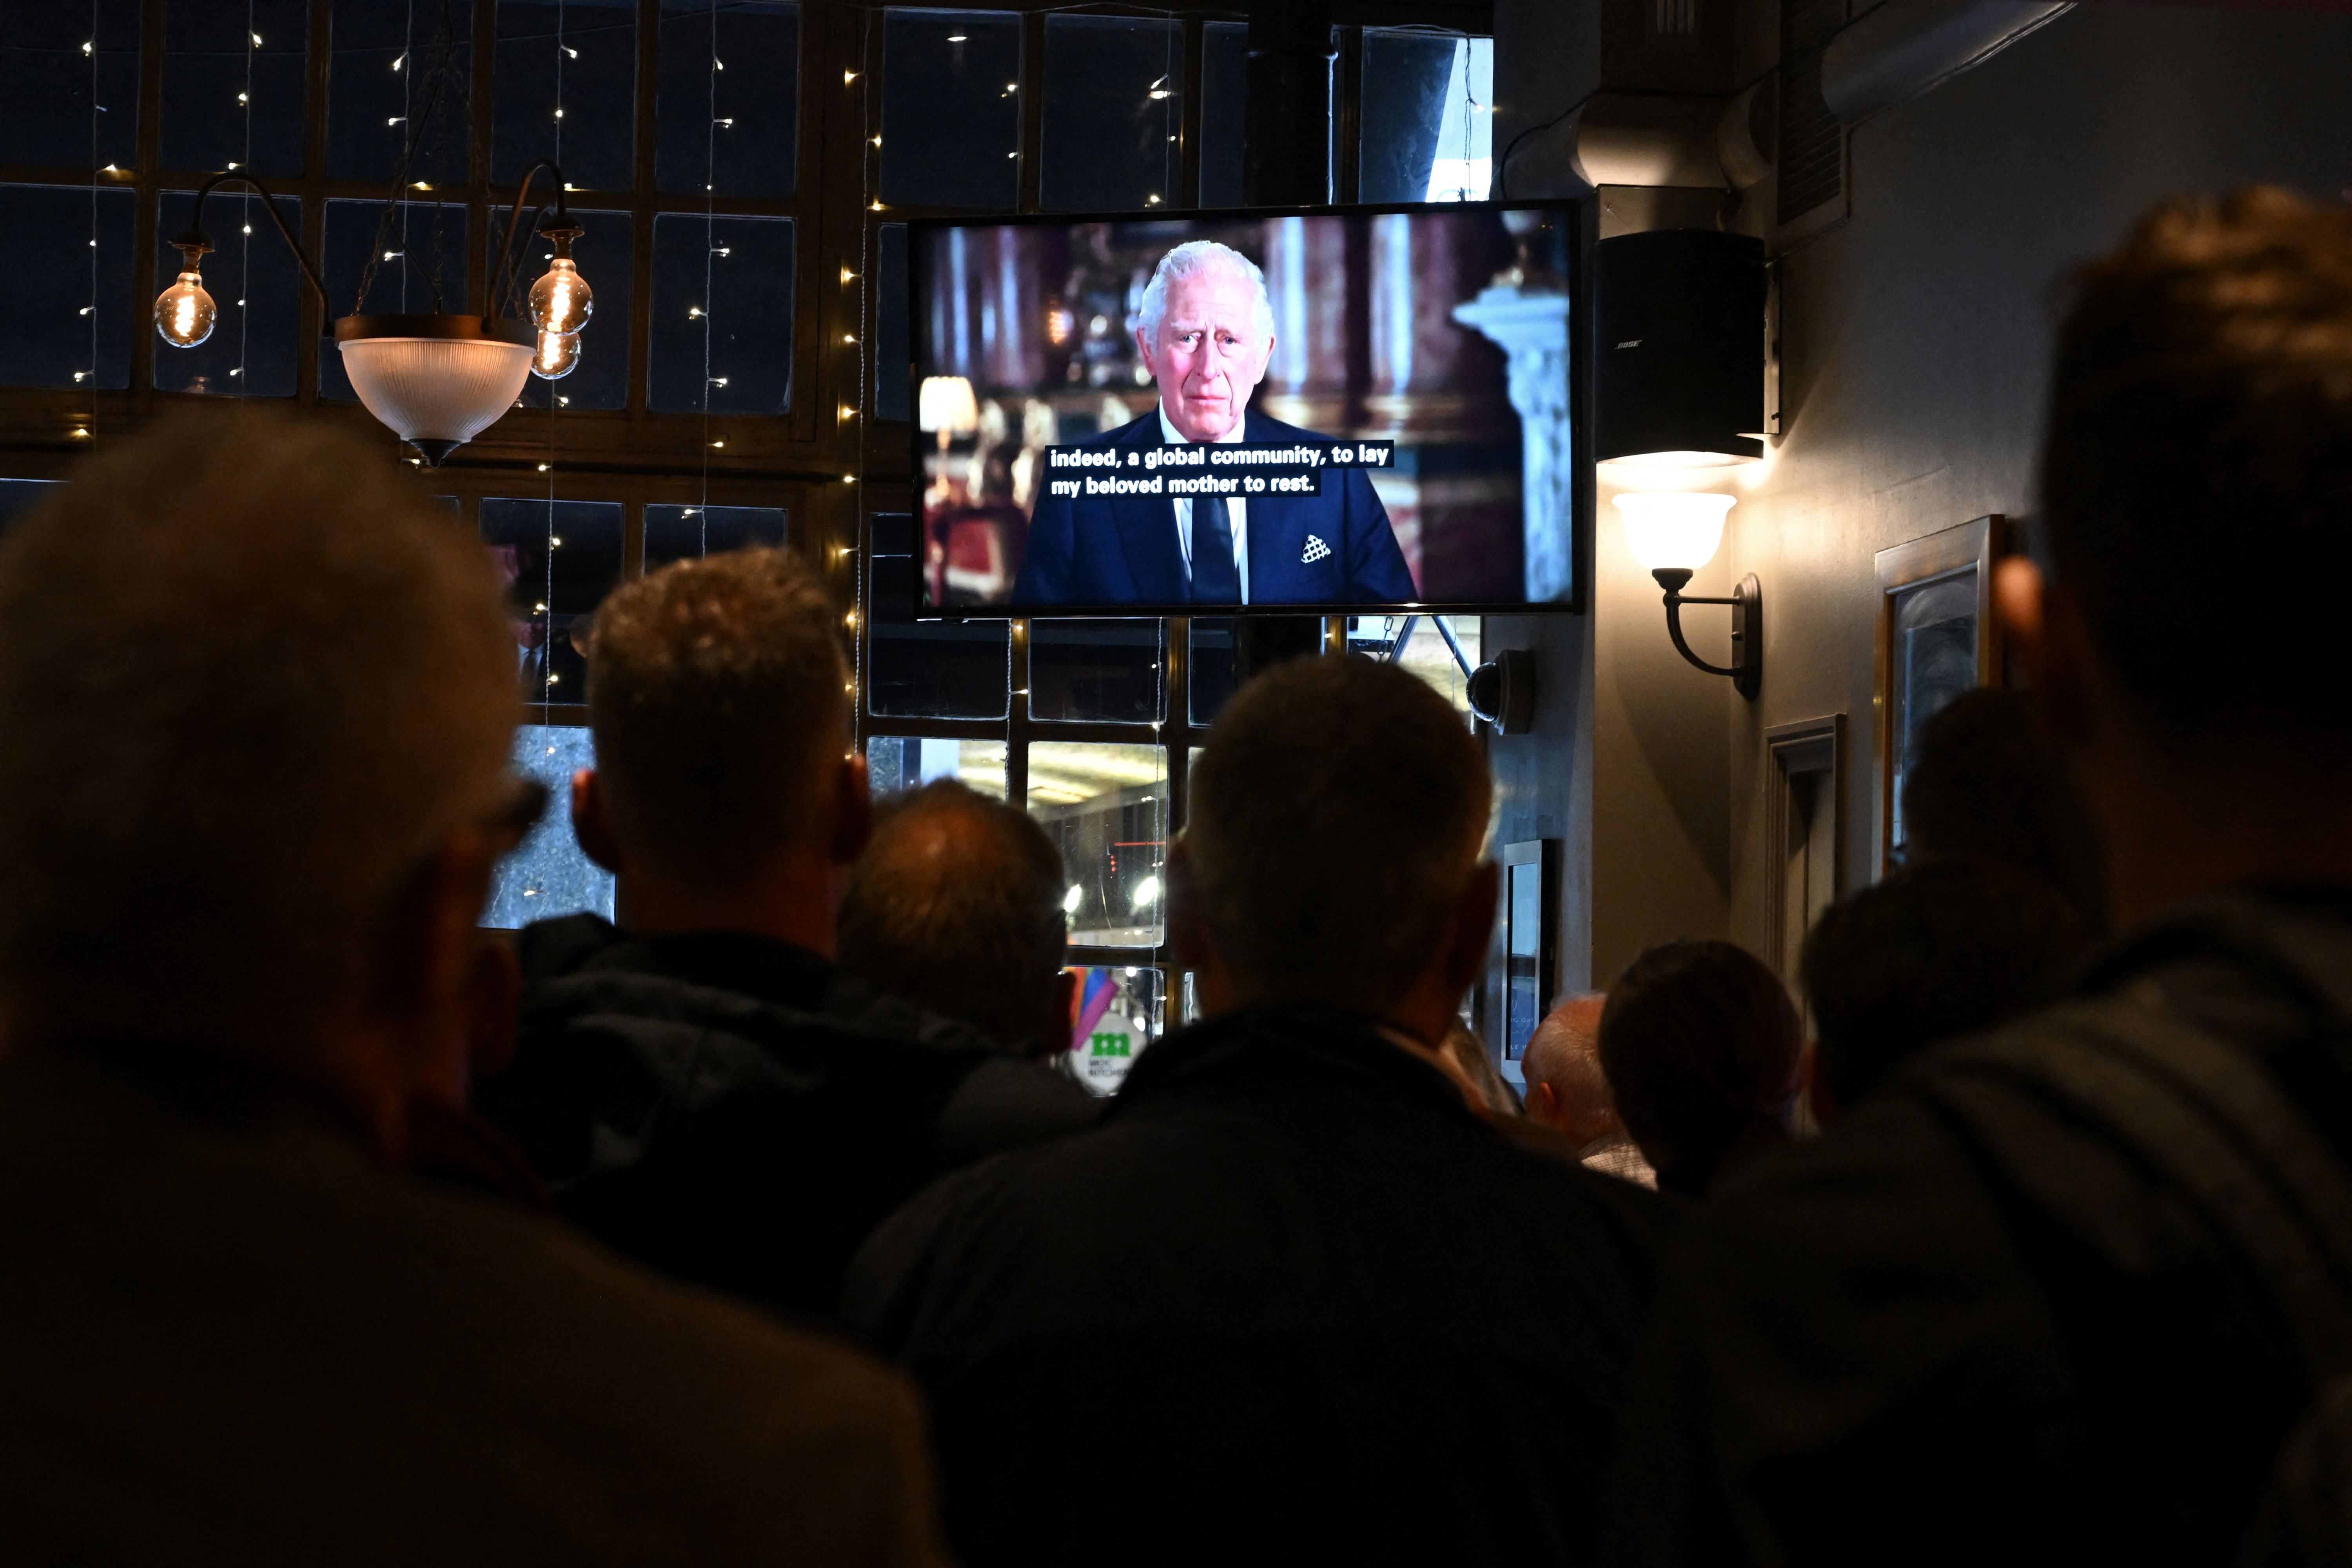 People watch King Charles speak on the television in a dark pub.